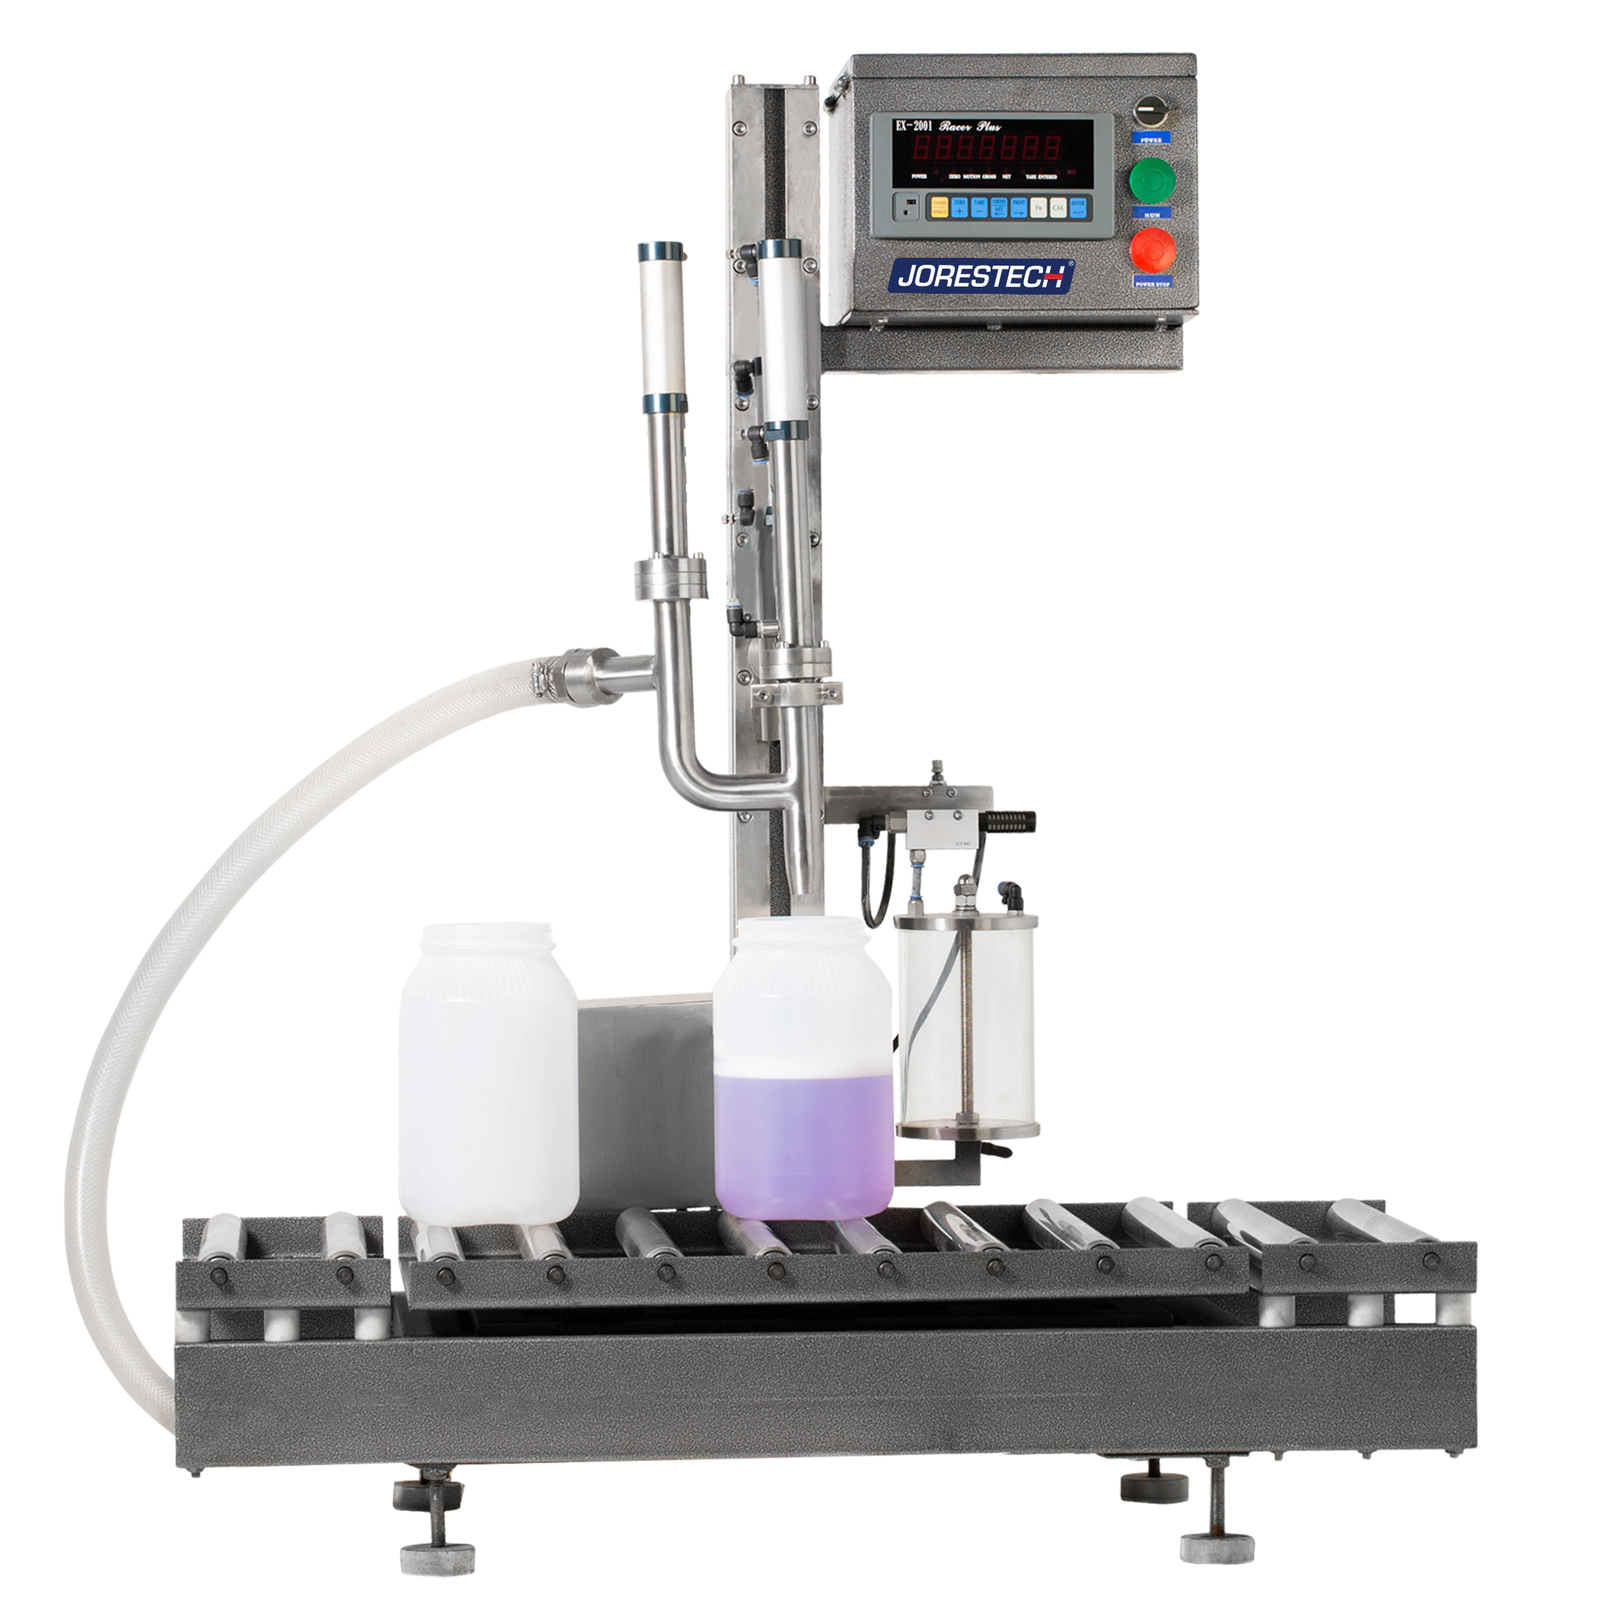 Image of the Jorestech net weight liquid filler with integrated roller conveyor shown in a frontal view over white background. There are two large containers on the conveyor, one of them is positioned below the dispensing nozzle and is being filled with a purple liquid solution.